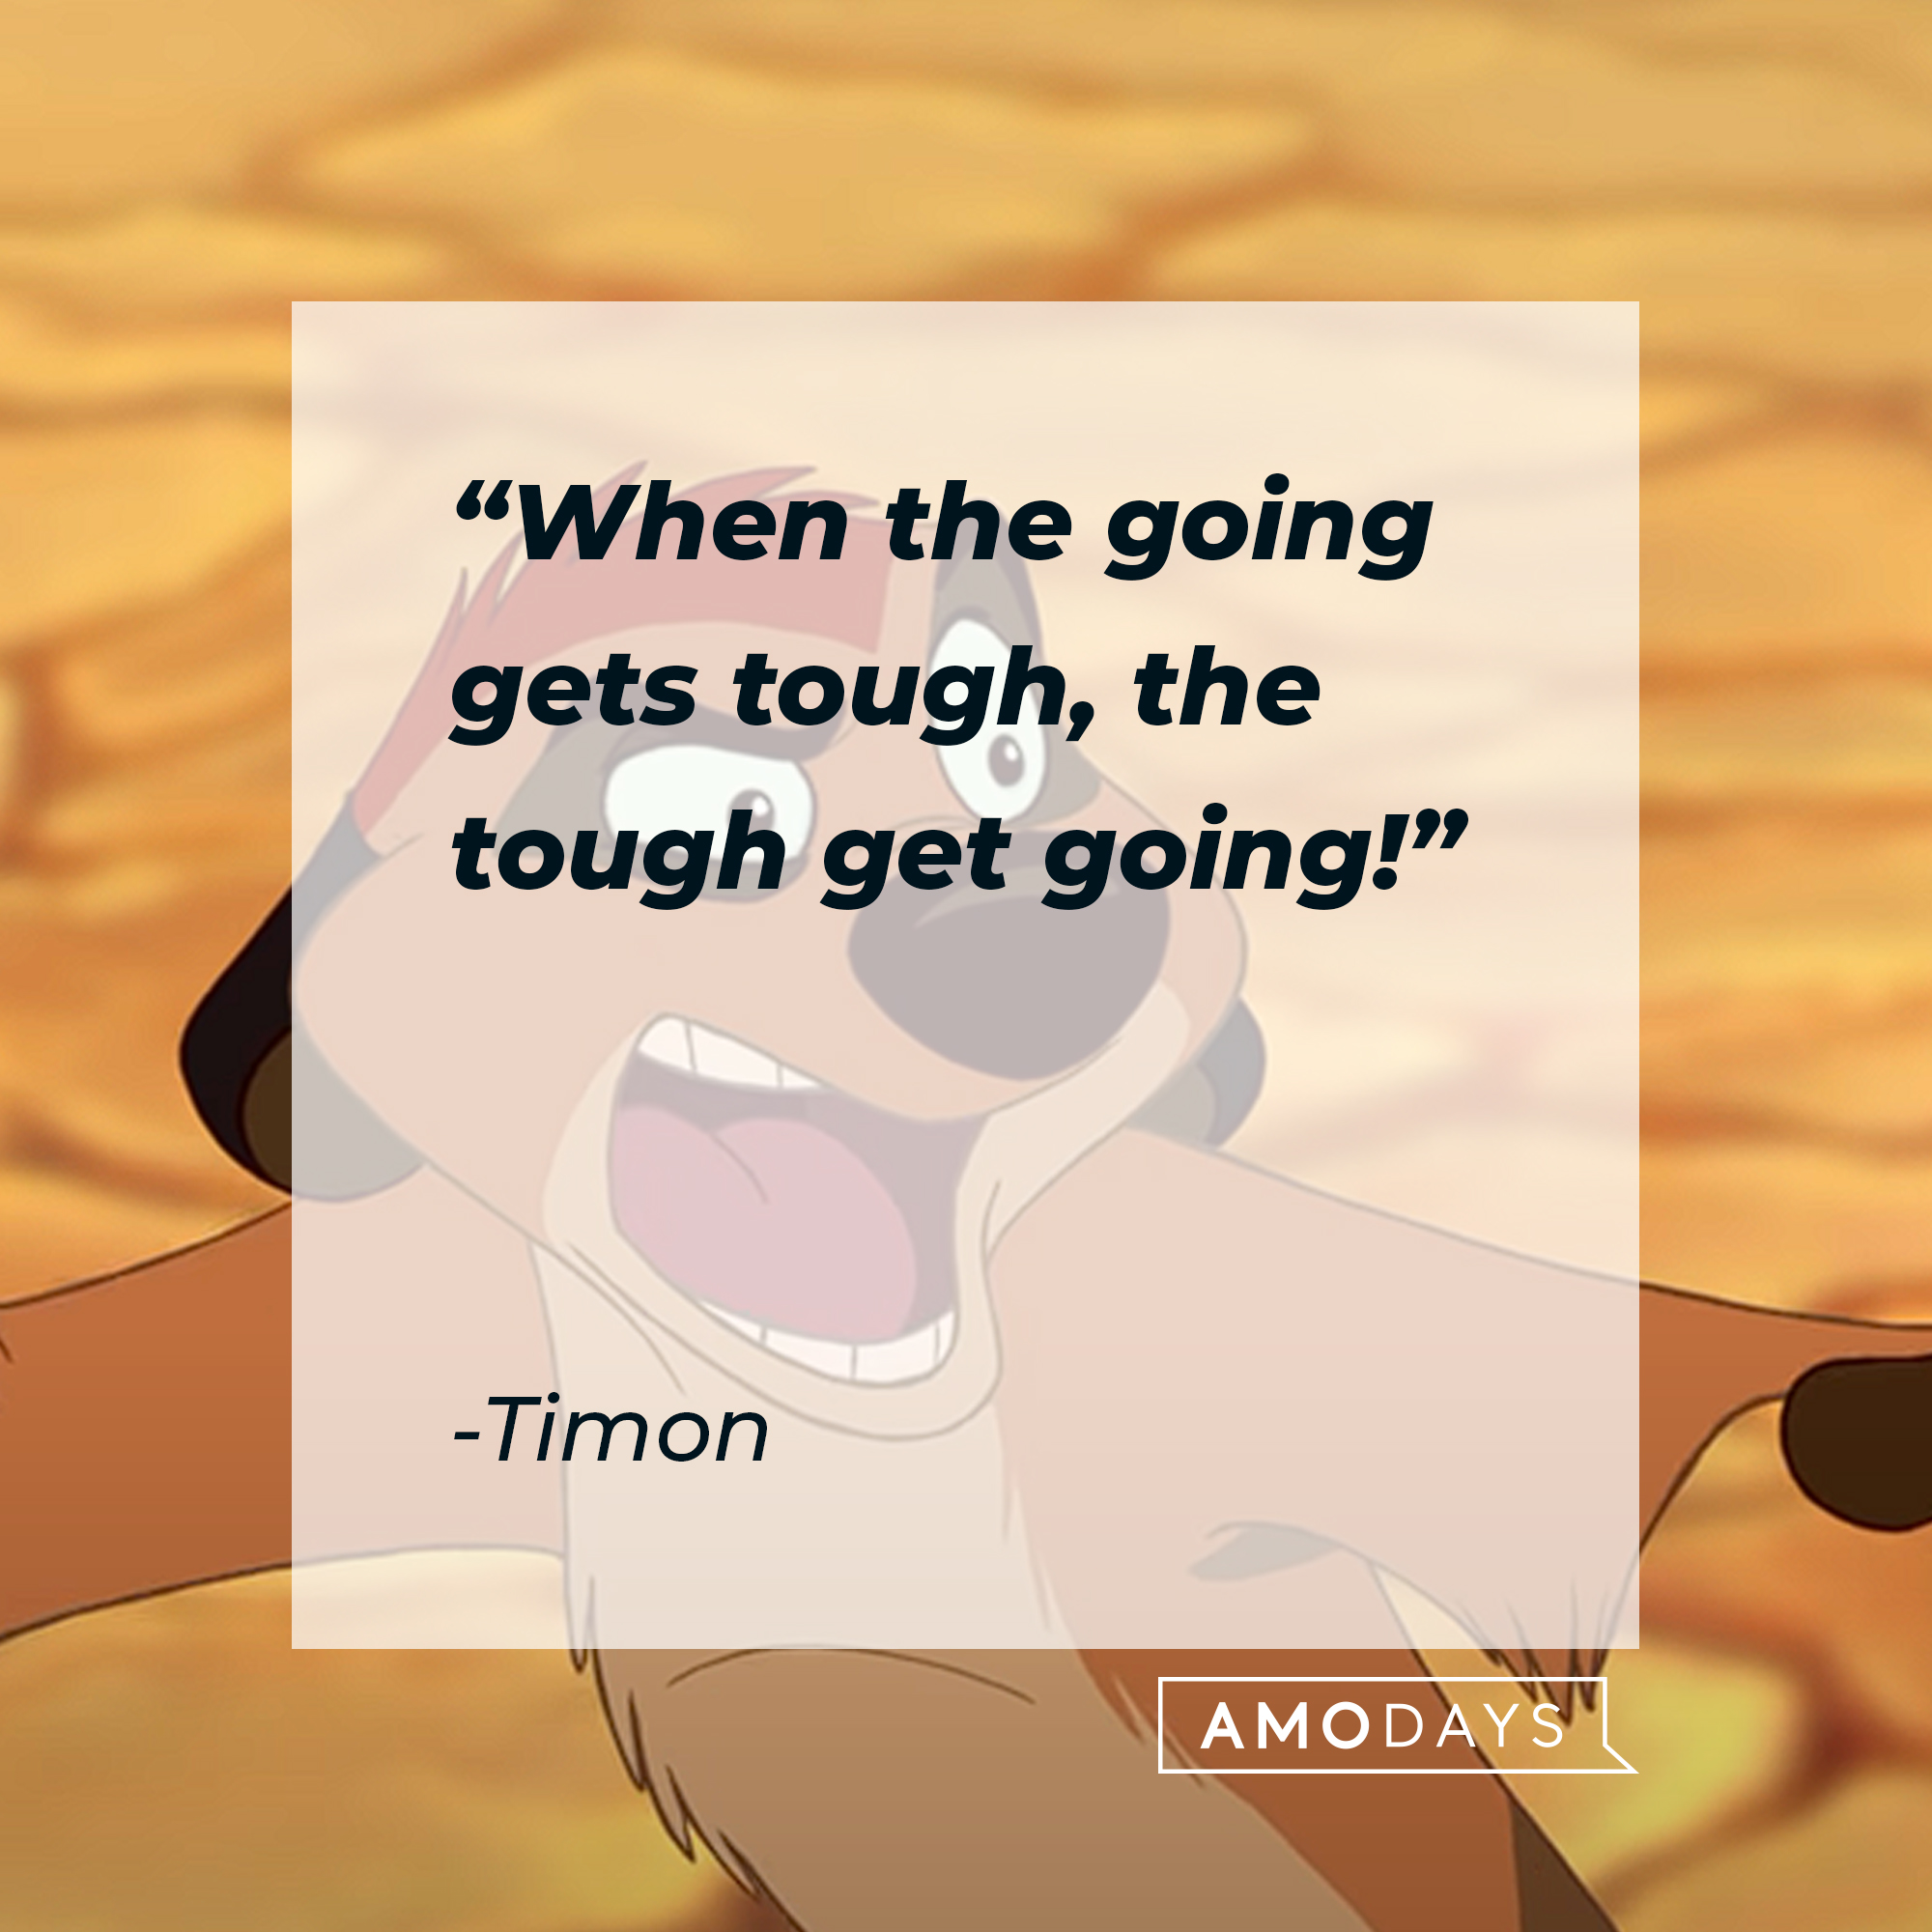 Timon with his quote: “When the going gets tough, the tough get going!” | Source:  youtube.com/disneyfr